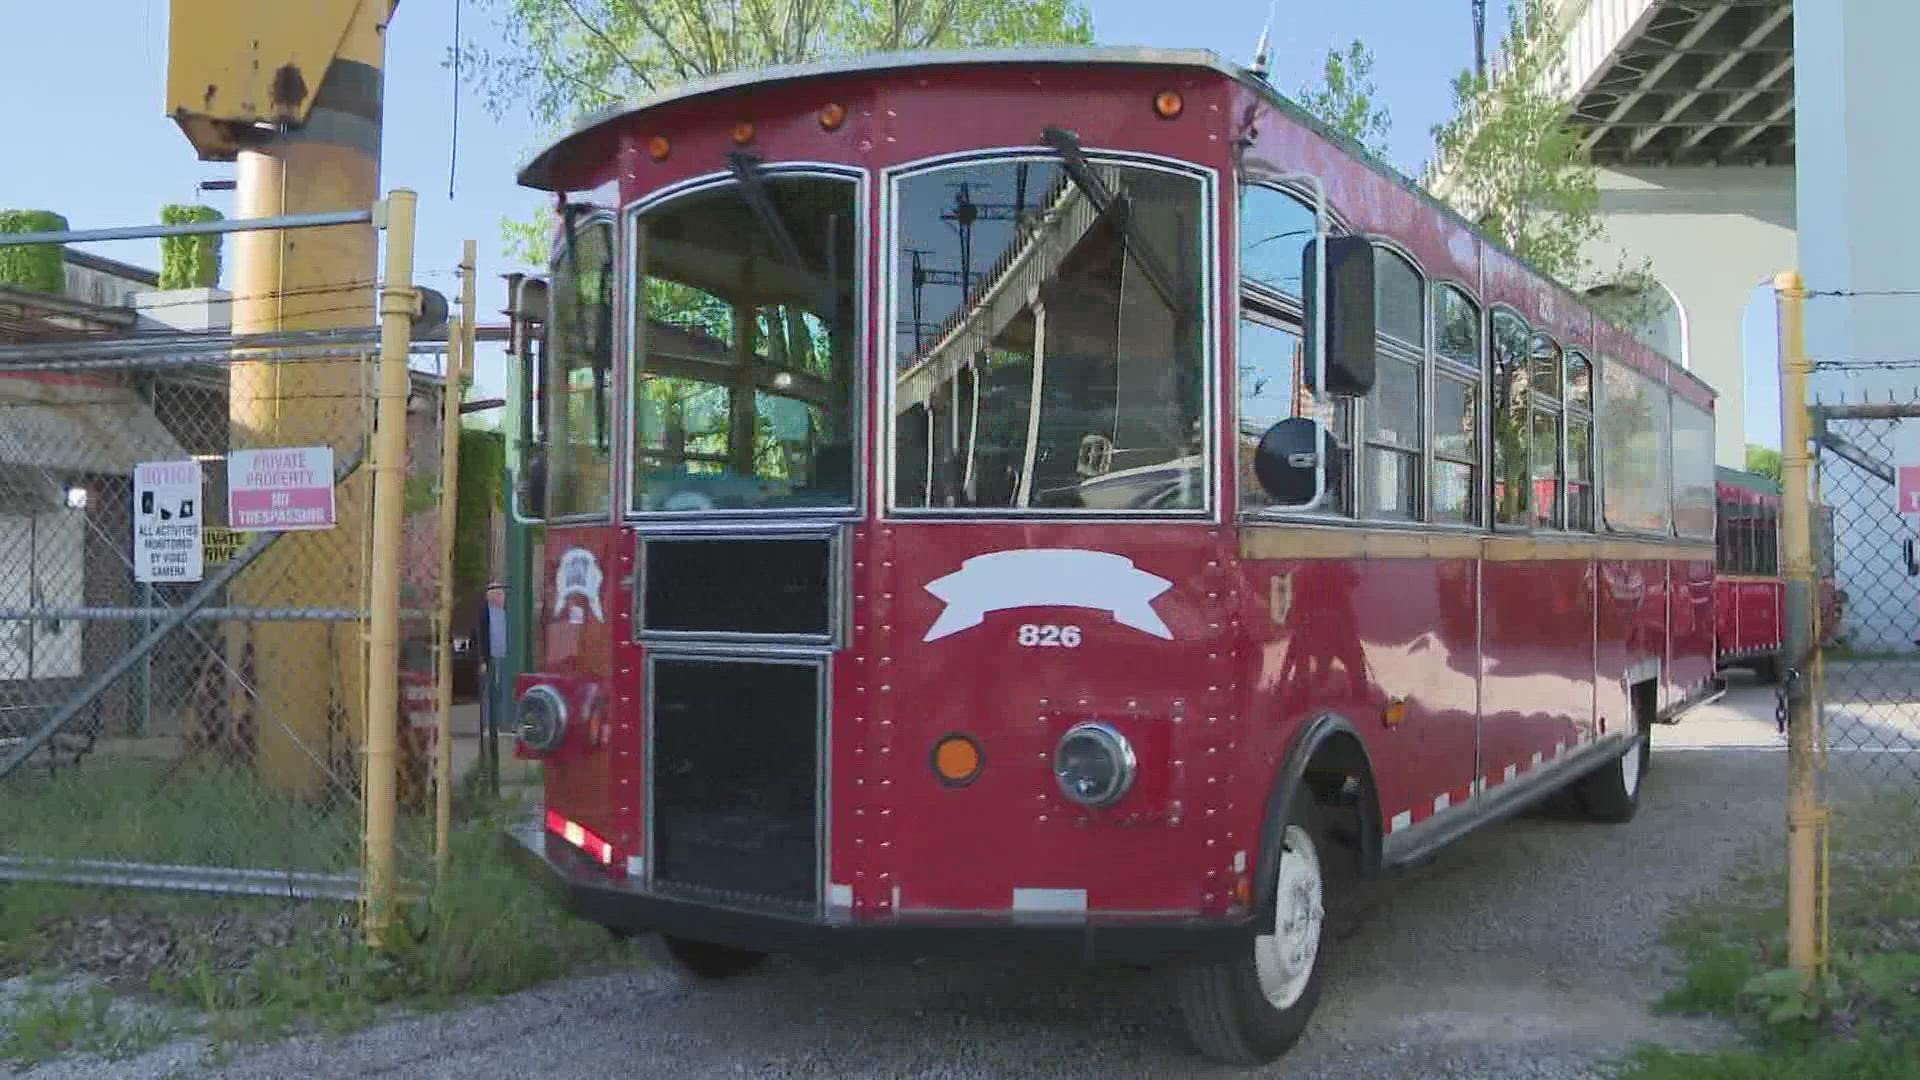 After decades of serving Cleveland, the fleet of vehicles with Lolly the Trolley have left for their new home in Florida.